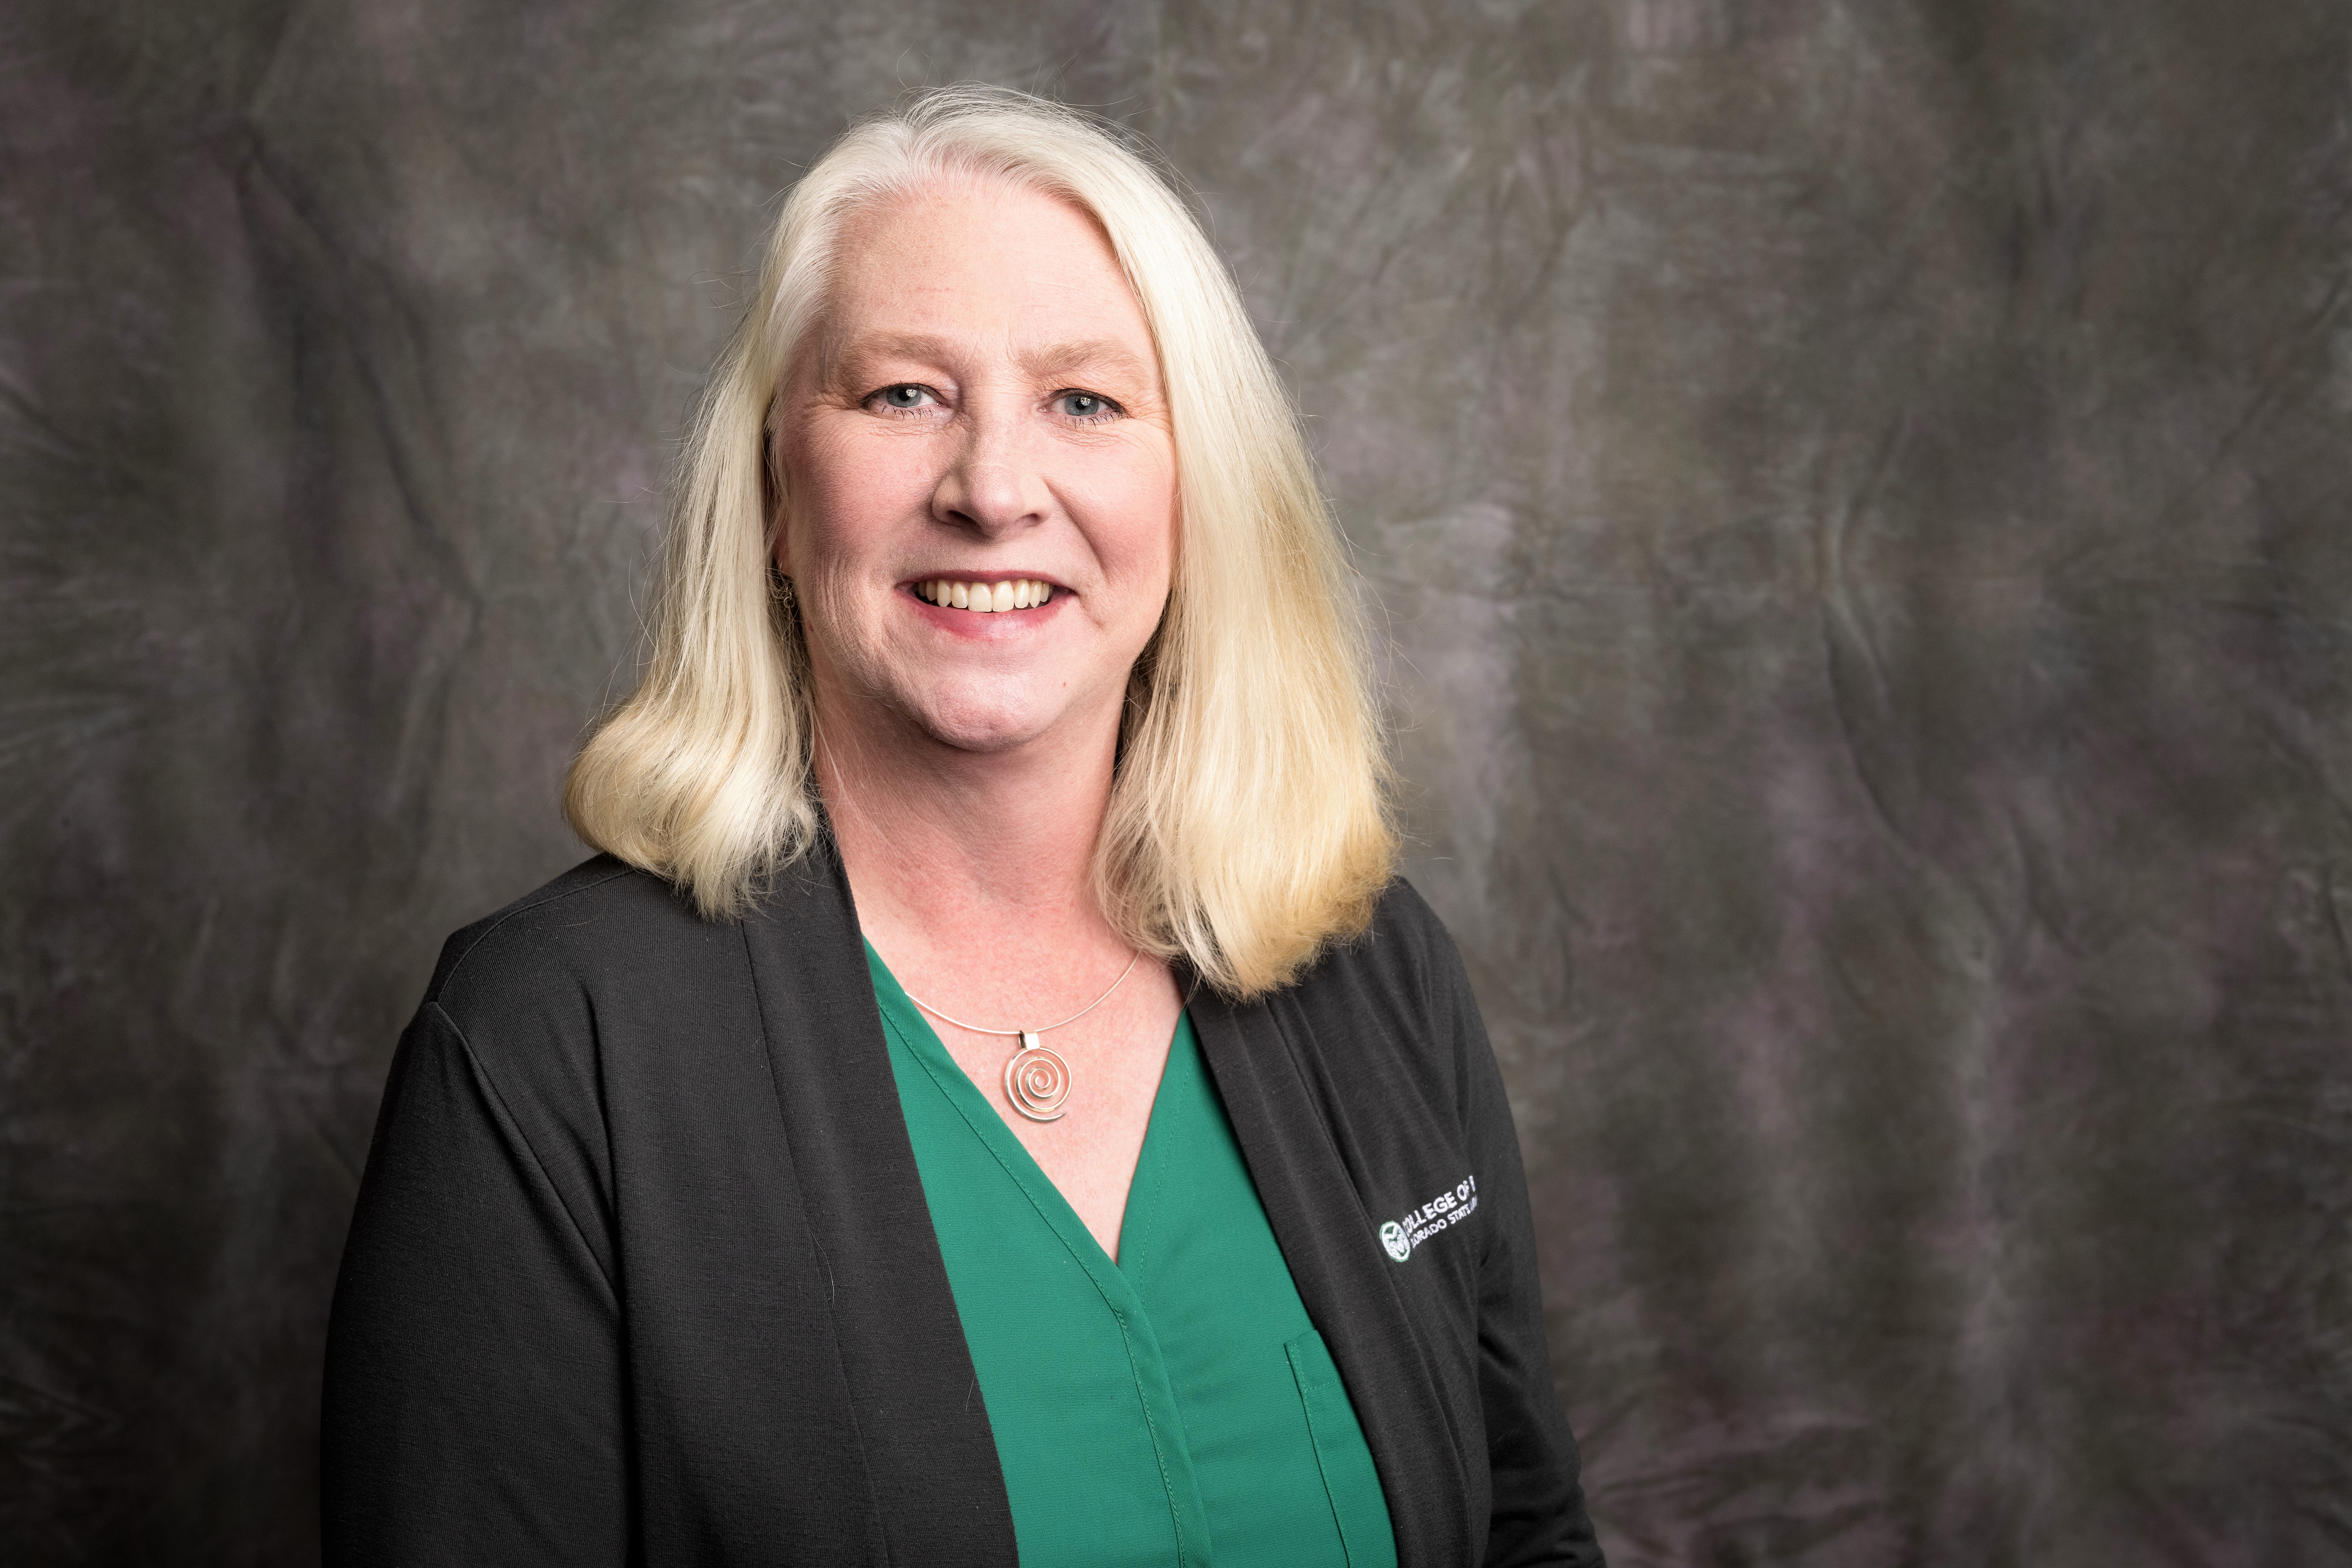 Headshot of Lorie Humphrey, CCDA President, wearing a bright green top and grey cardigan with Colorado State University embroidered on the chest.